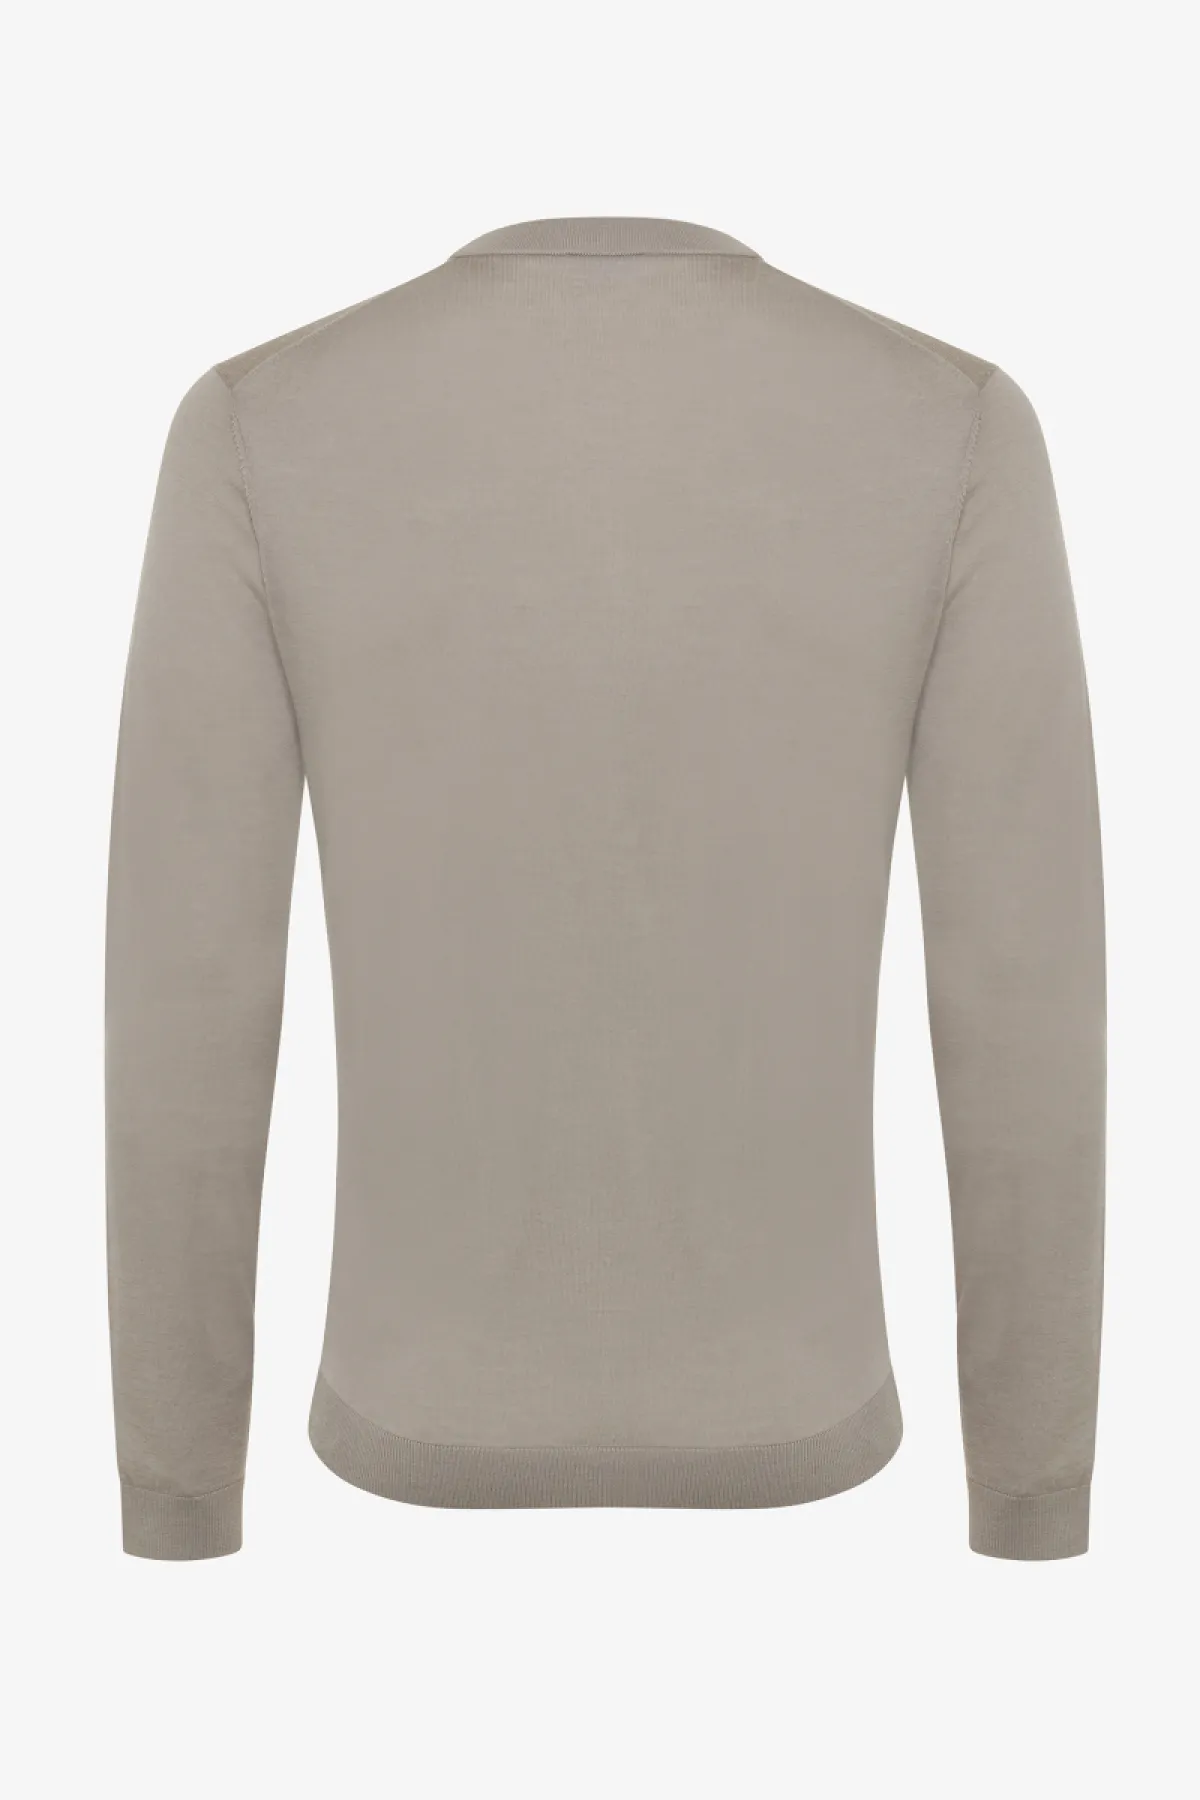 Taupe gold round neck